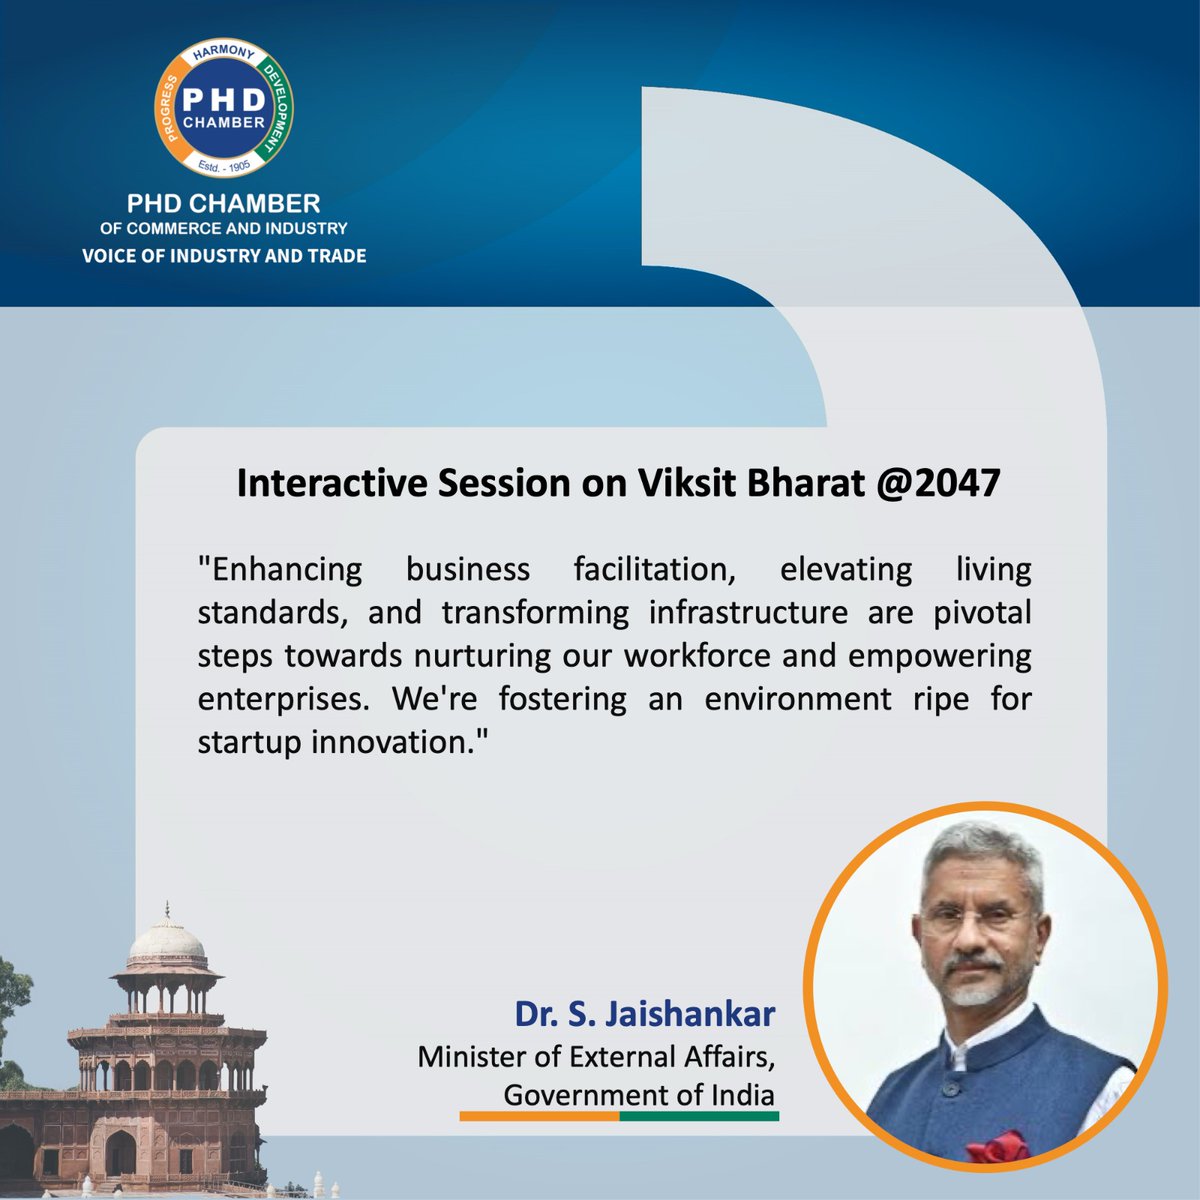 Dive into the visionary insights of S. Jaishankar, India's Minister of External Affairs, as he paints a roadmap for a flourishing India in 2047. Explore the wisdom and foresight shared at the interactive session on Viksit Bharat @2047 through his compelling quotes.